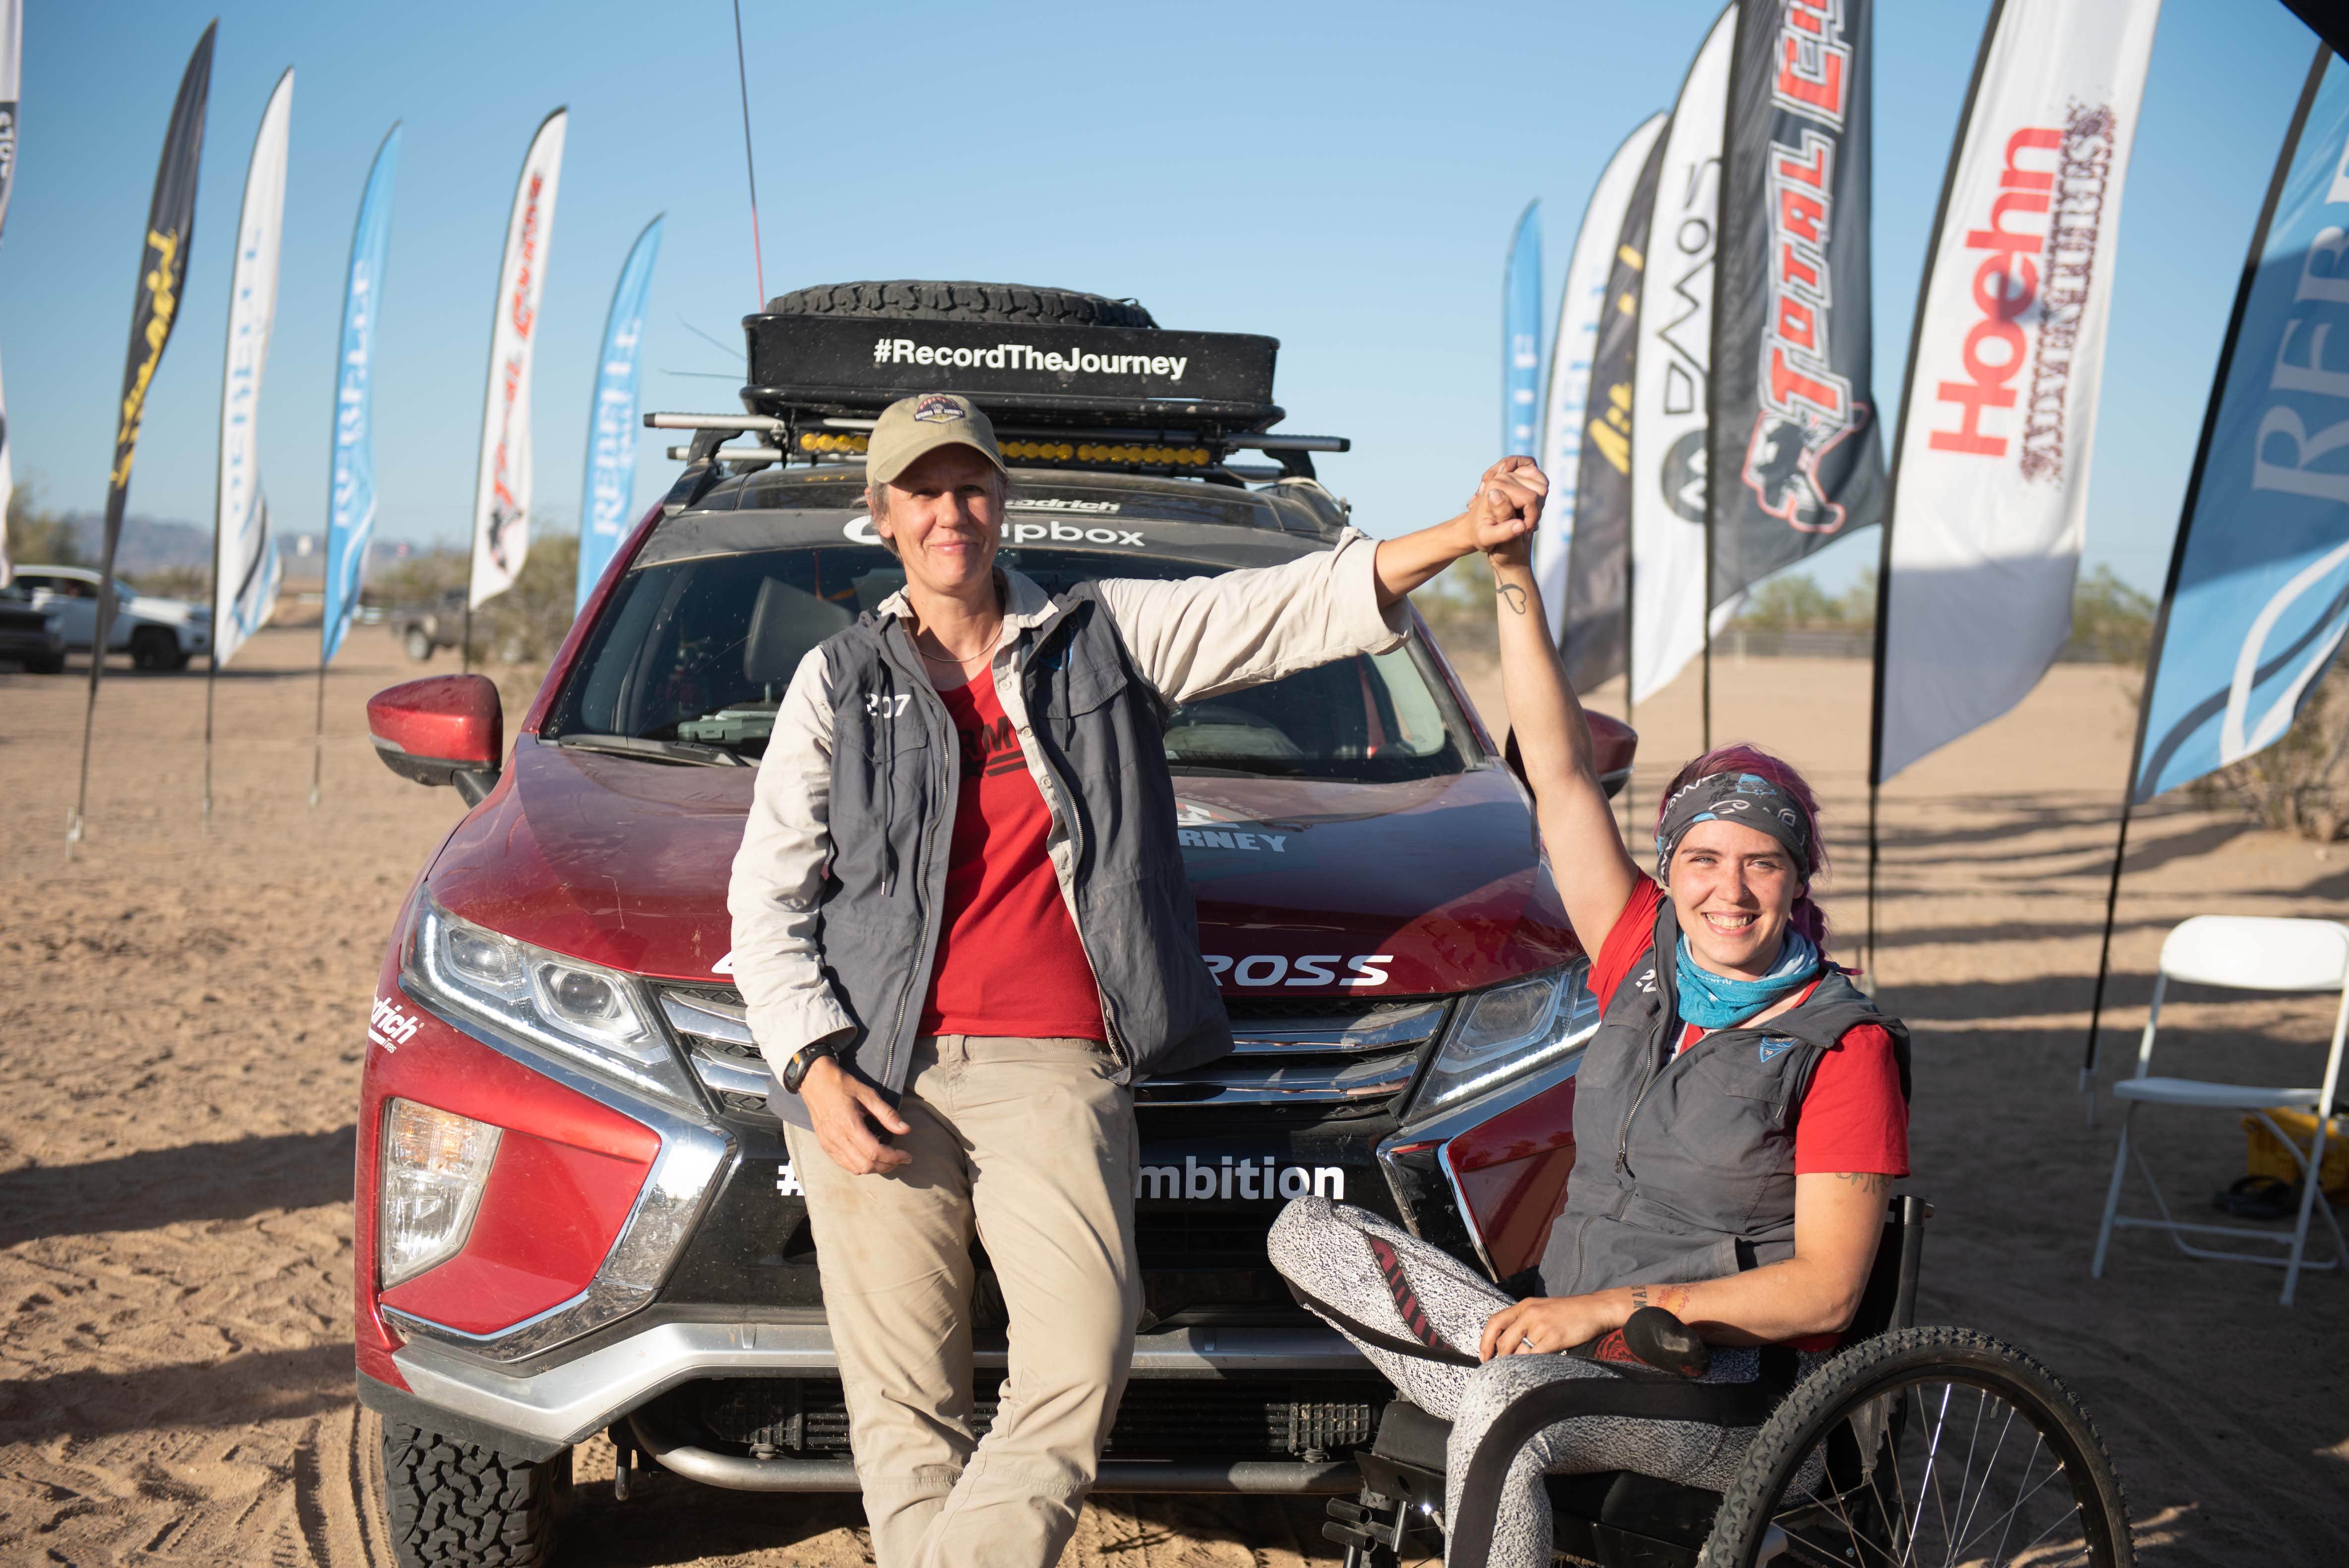 Adaptive off-road athlete Kara Behrend shown sitting in front of Mitsubishi SUV, arm raised clutching the hand of her teammate.